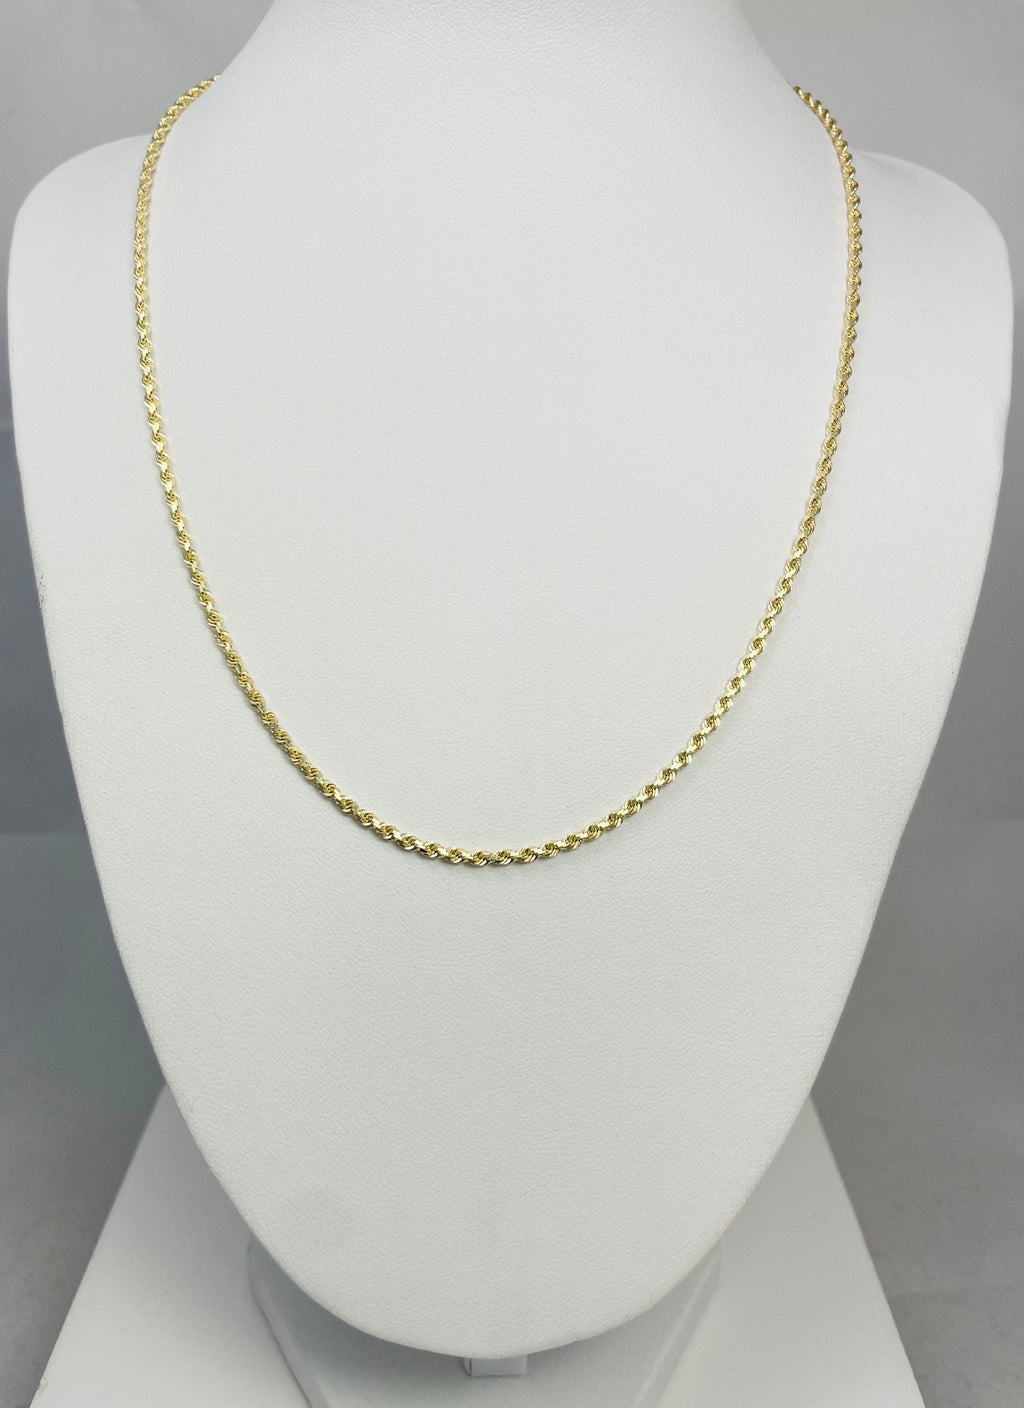 New! 18" 10k Solid Diamond Cut Rope Chain Necklace